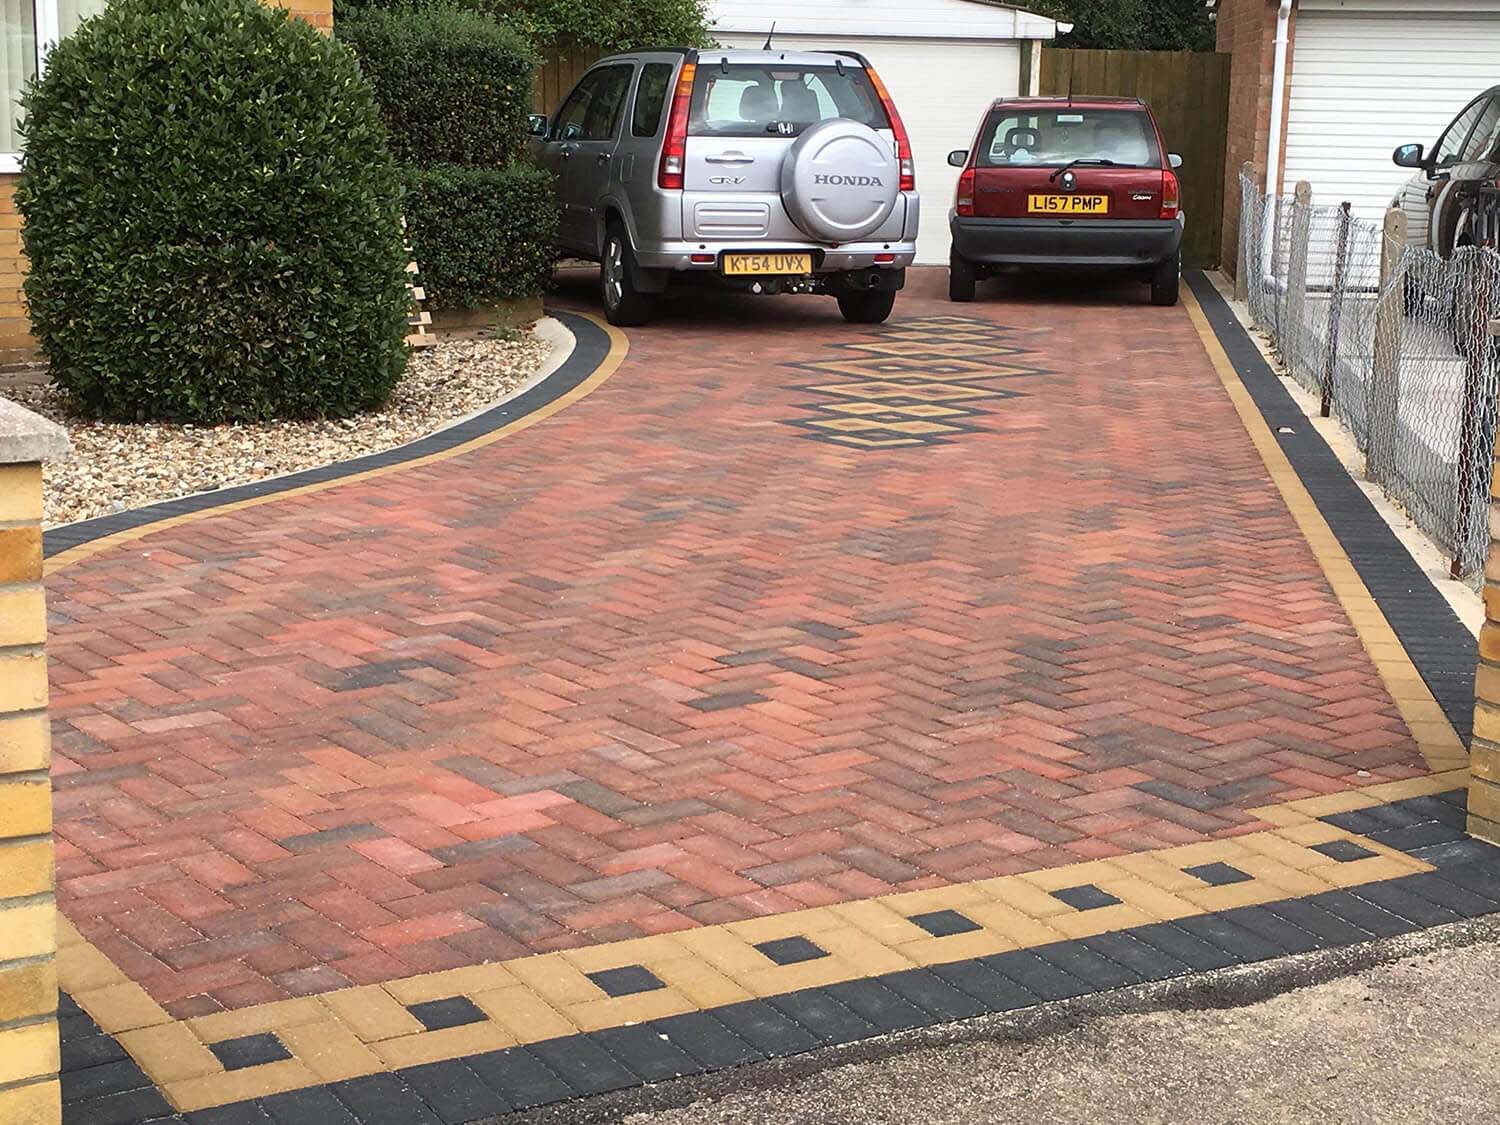 Paving Contractors Near Me in Manchester